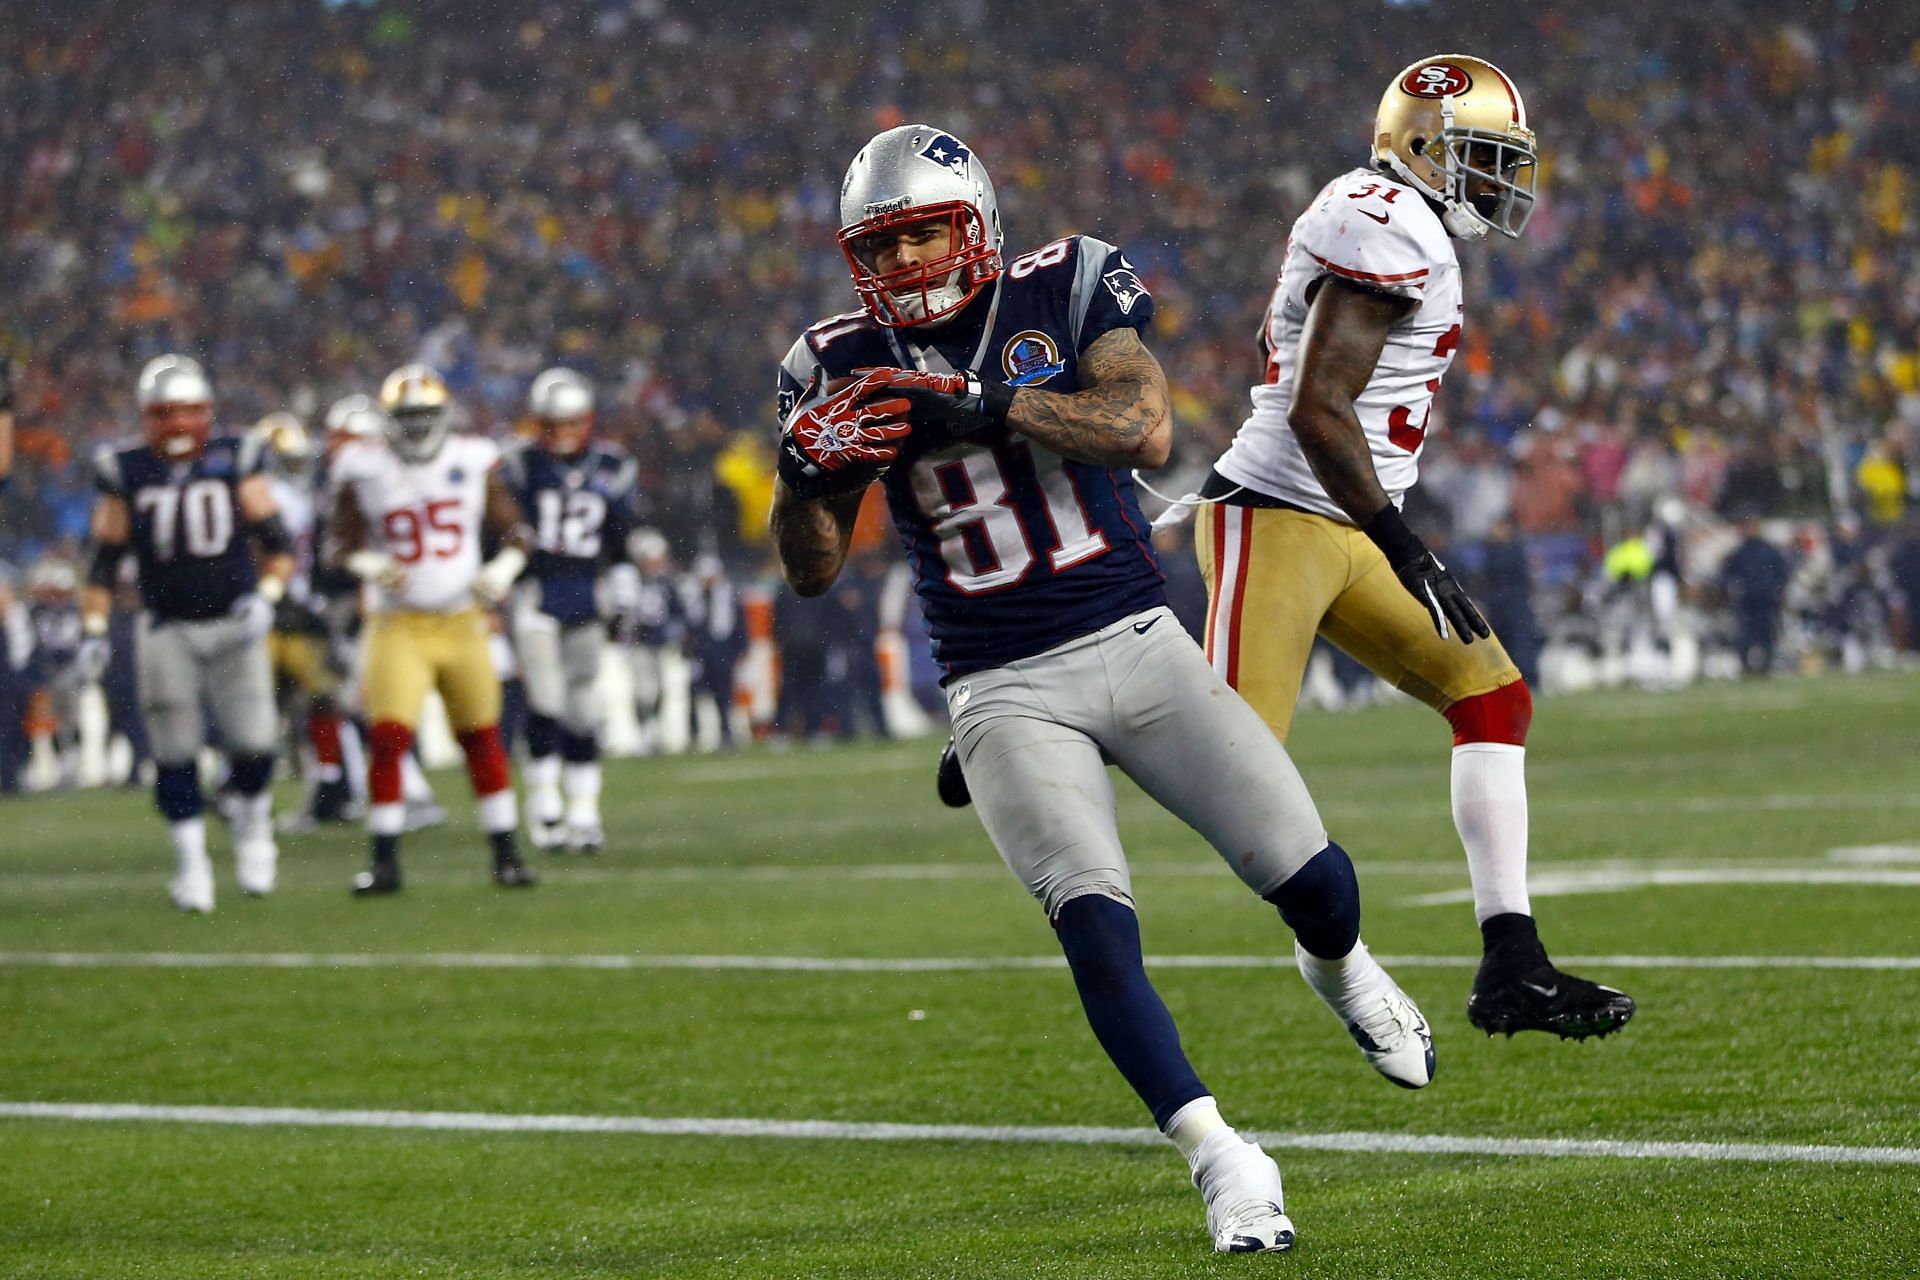 Hernandez played with the Patriots in the NFL